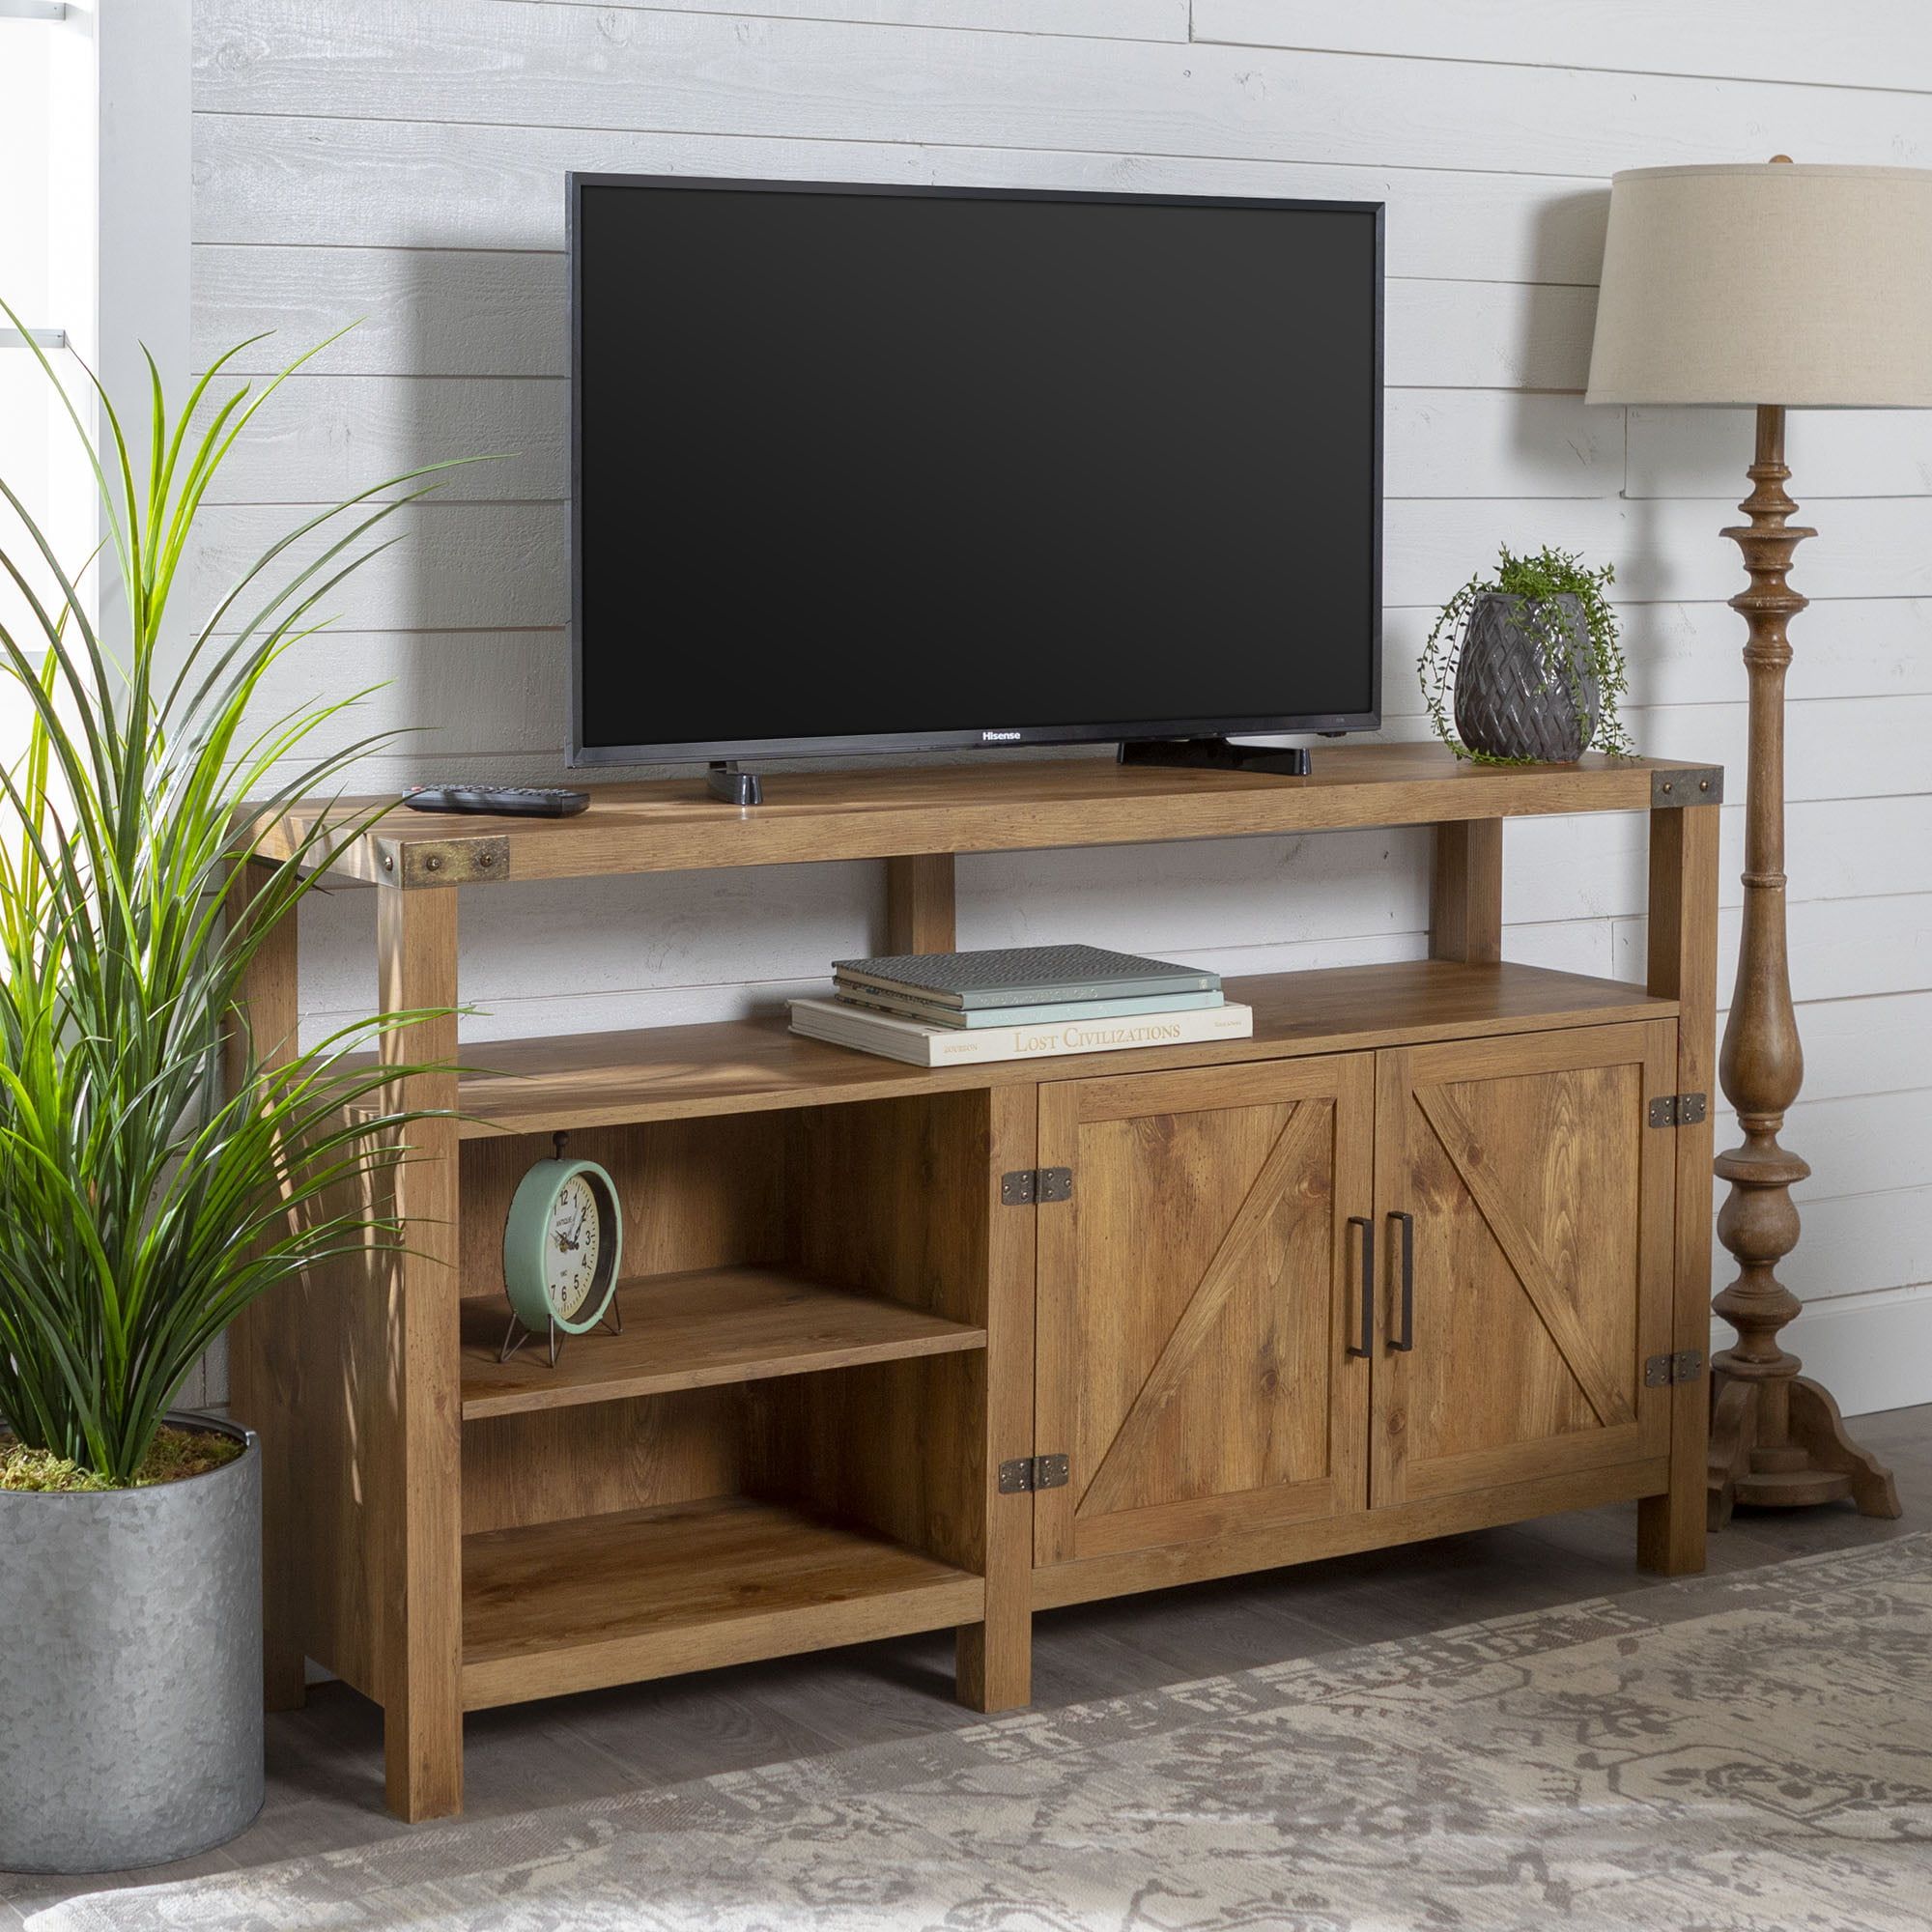 Woven Paths Modern Farmhouse Highboy Tv Stand For Tvs Up To 65 Regarding Farmhouse Stands For Tvs (View 16 of 20)